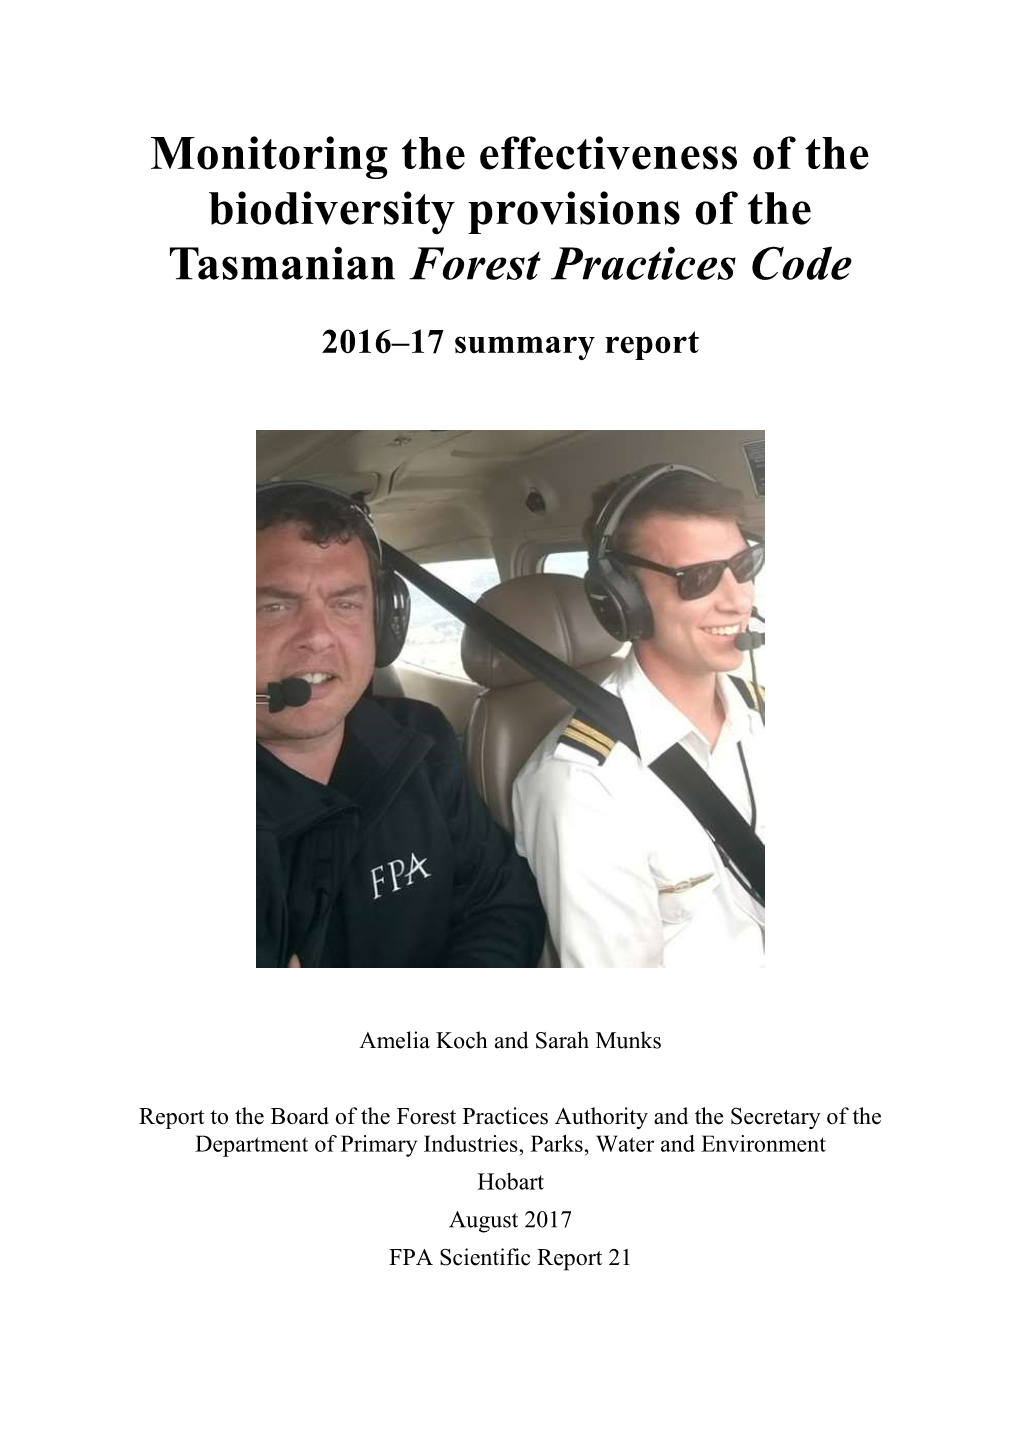 FPA Report 2016-17 Monitoring the Effectiveness of the Biodiversity Provisions of the Tasmanian Forest Practices